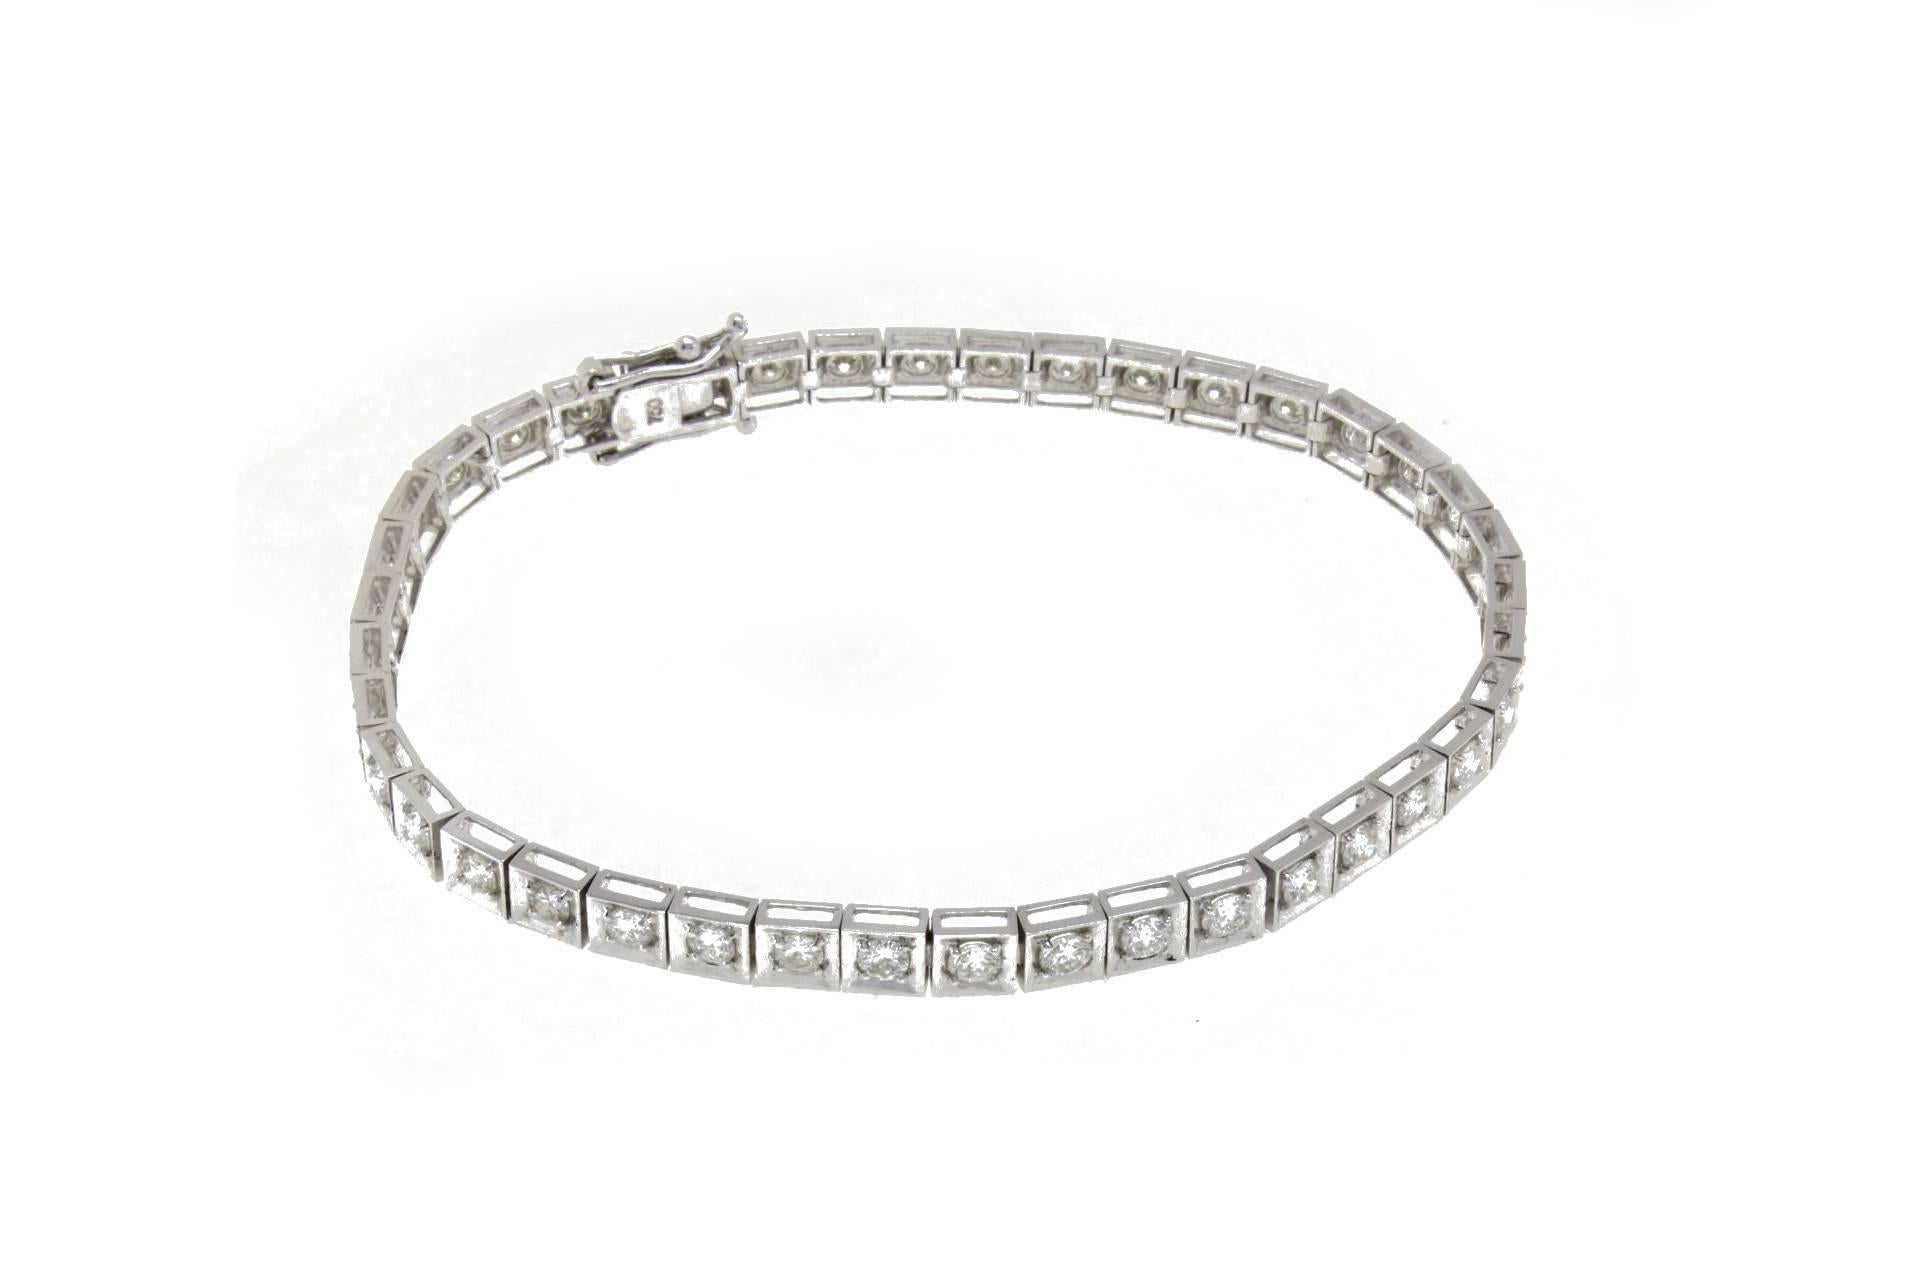 SHIPPING POLICY: 
No additional costs will be added to this order. 
Shipping costs will be totally covered by the seller (customs duties included).

18kt white gold tennis bracelet mounted with diamonds.
Diamonds 3.27 kt
Tot.Weight 12.00 gr
R.F